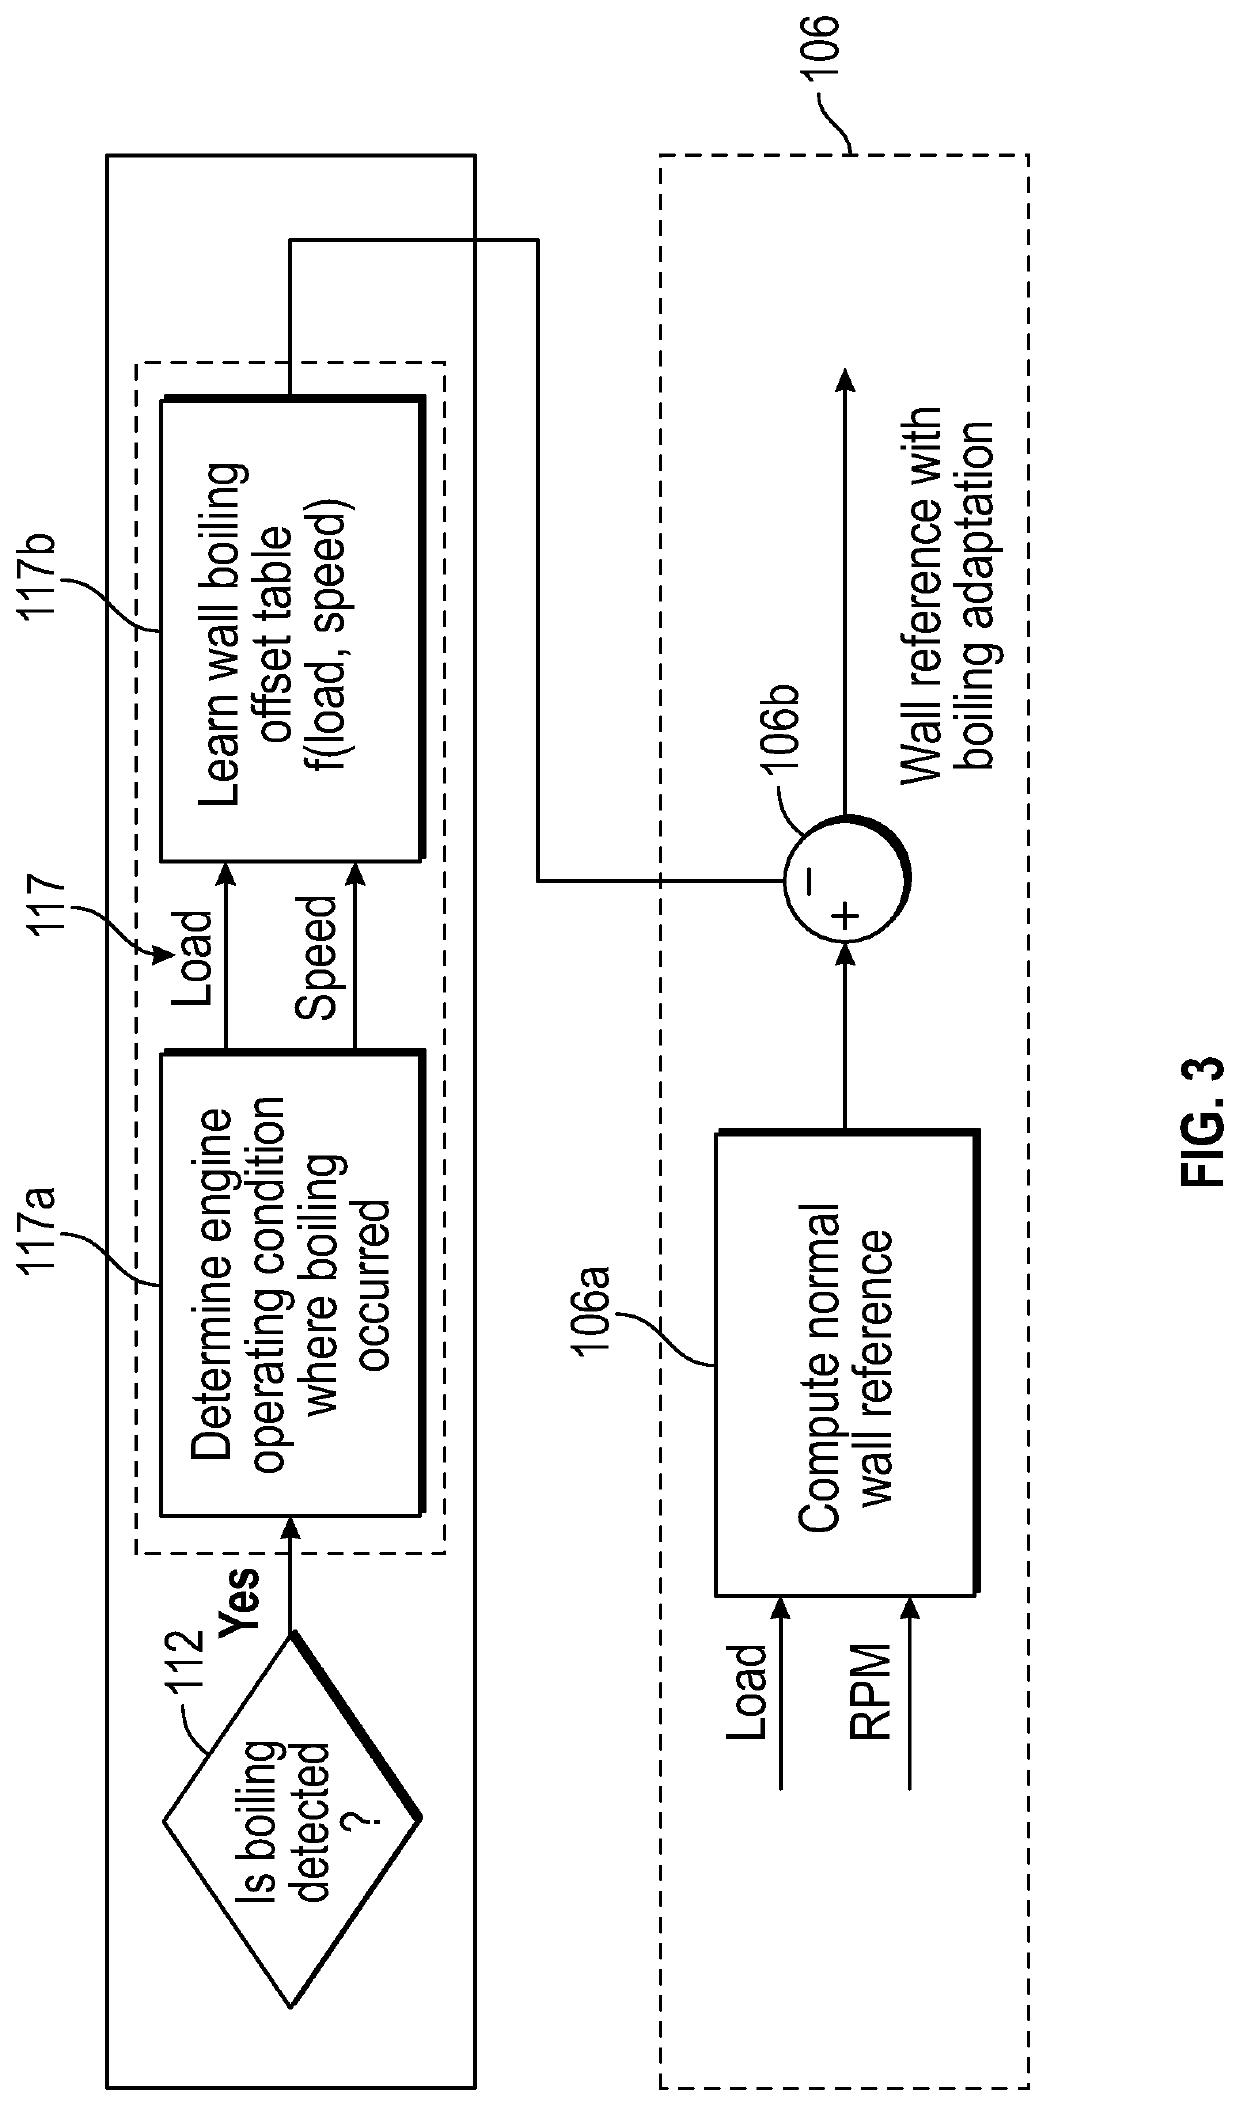 Method and apparatus for control of propulsion system warmup based on engine wall temperature